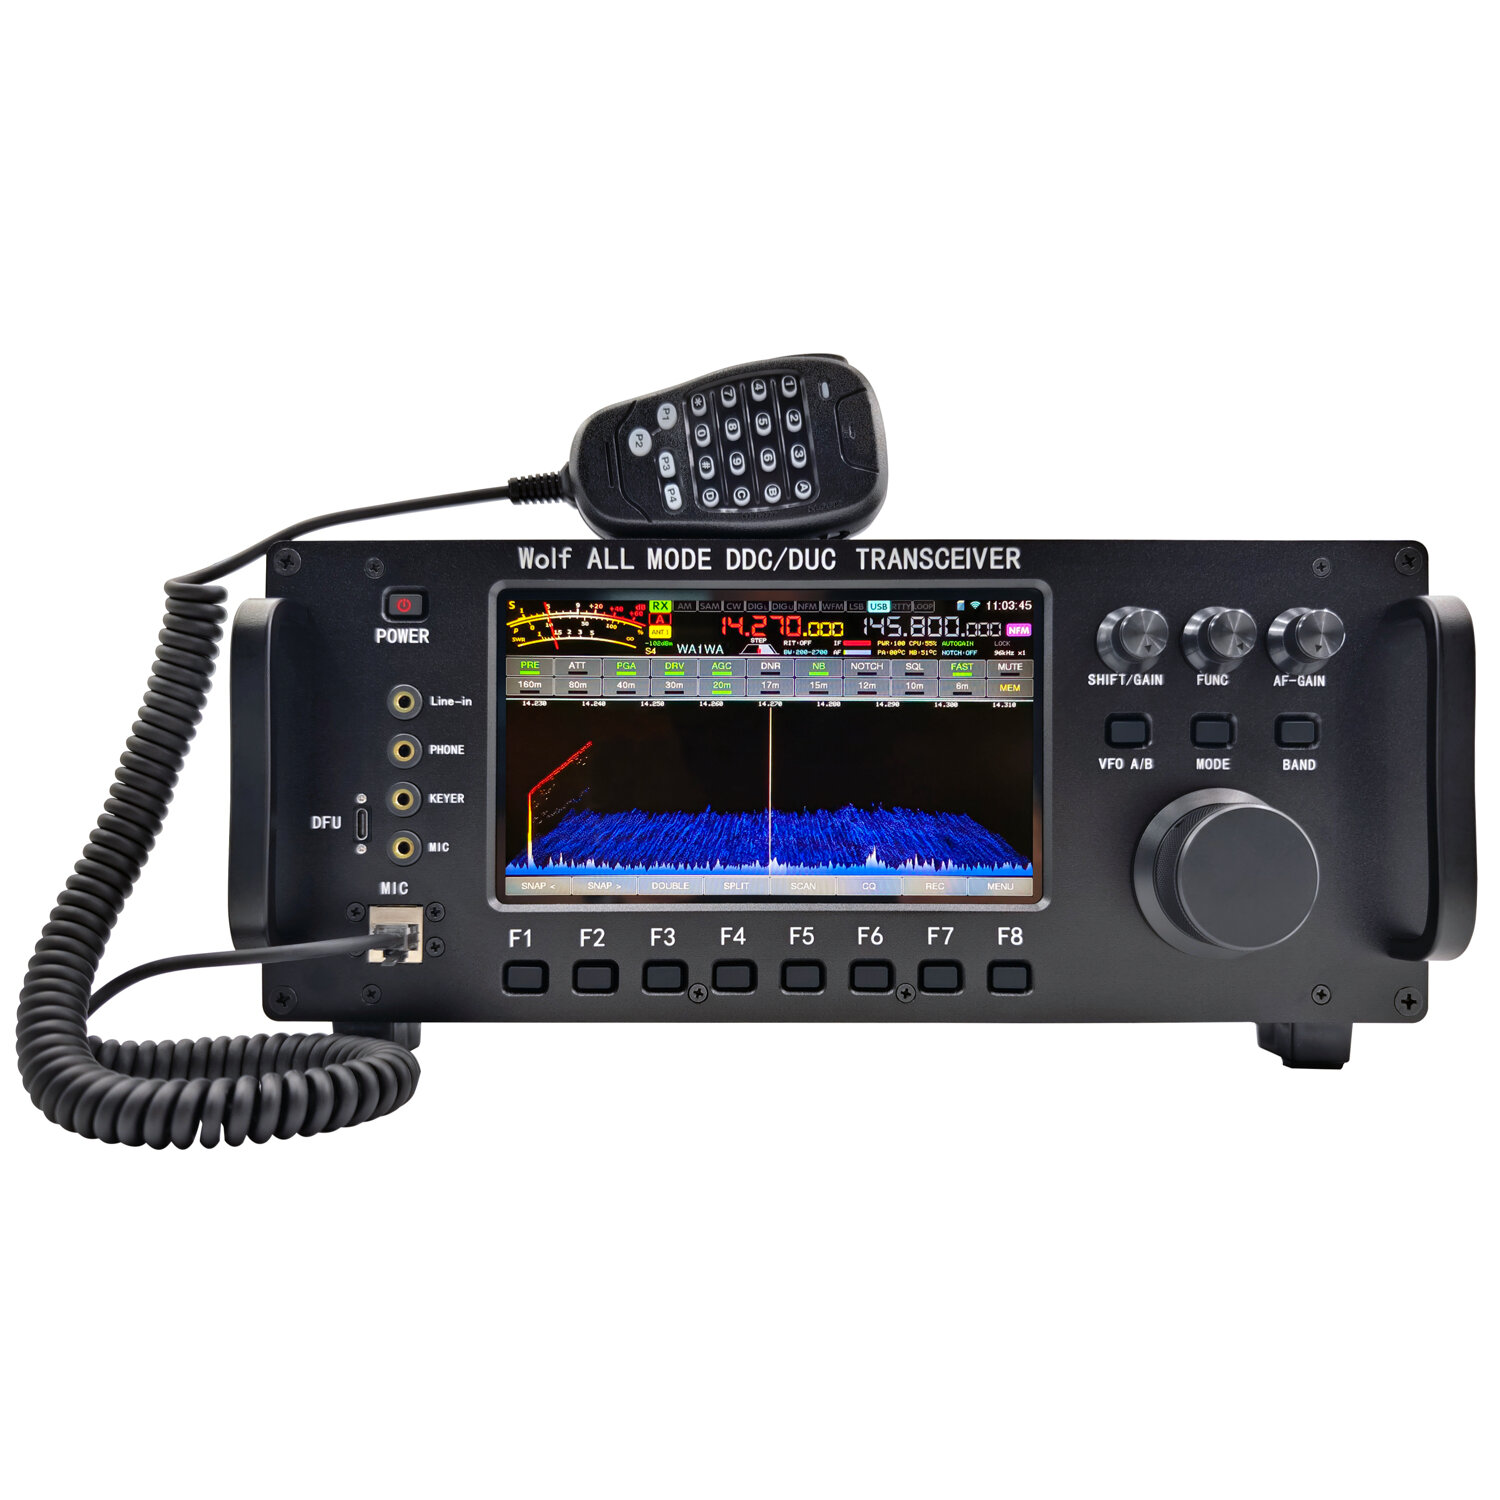 best price,20w,750mhz,wolf,all,mode,ddc/duc,transceiver,mobile,radio,discount